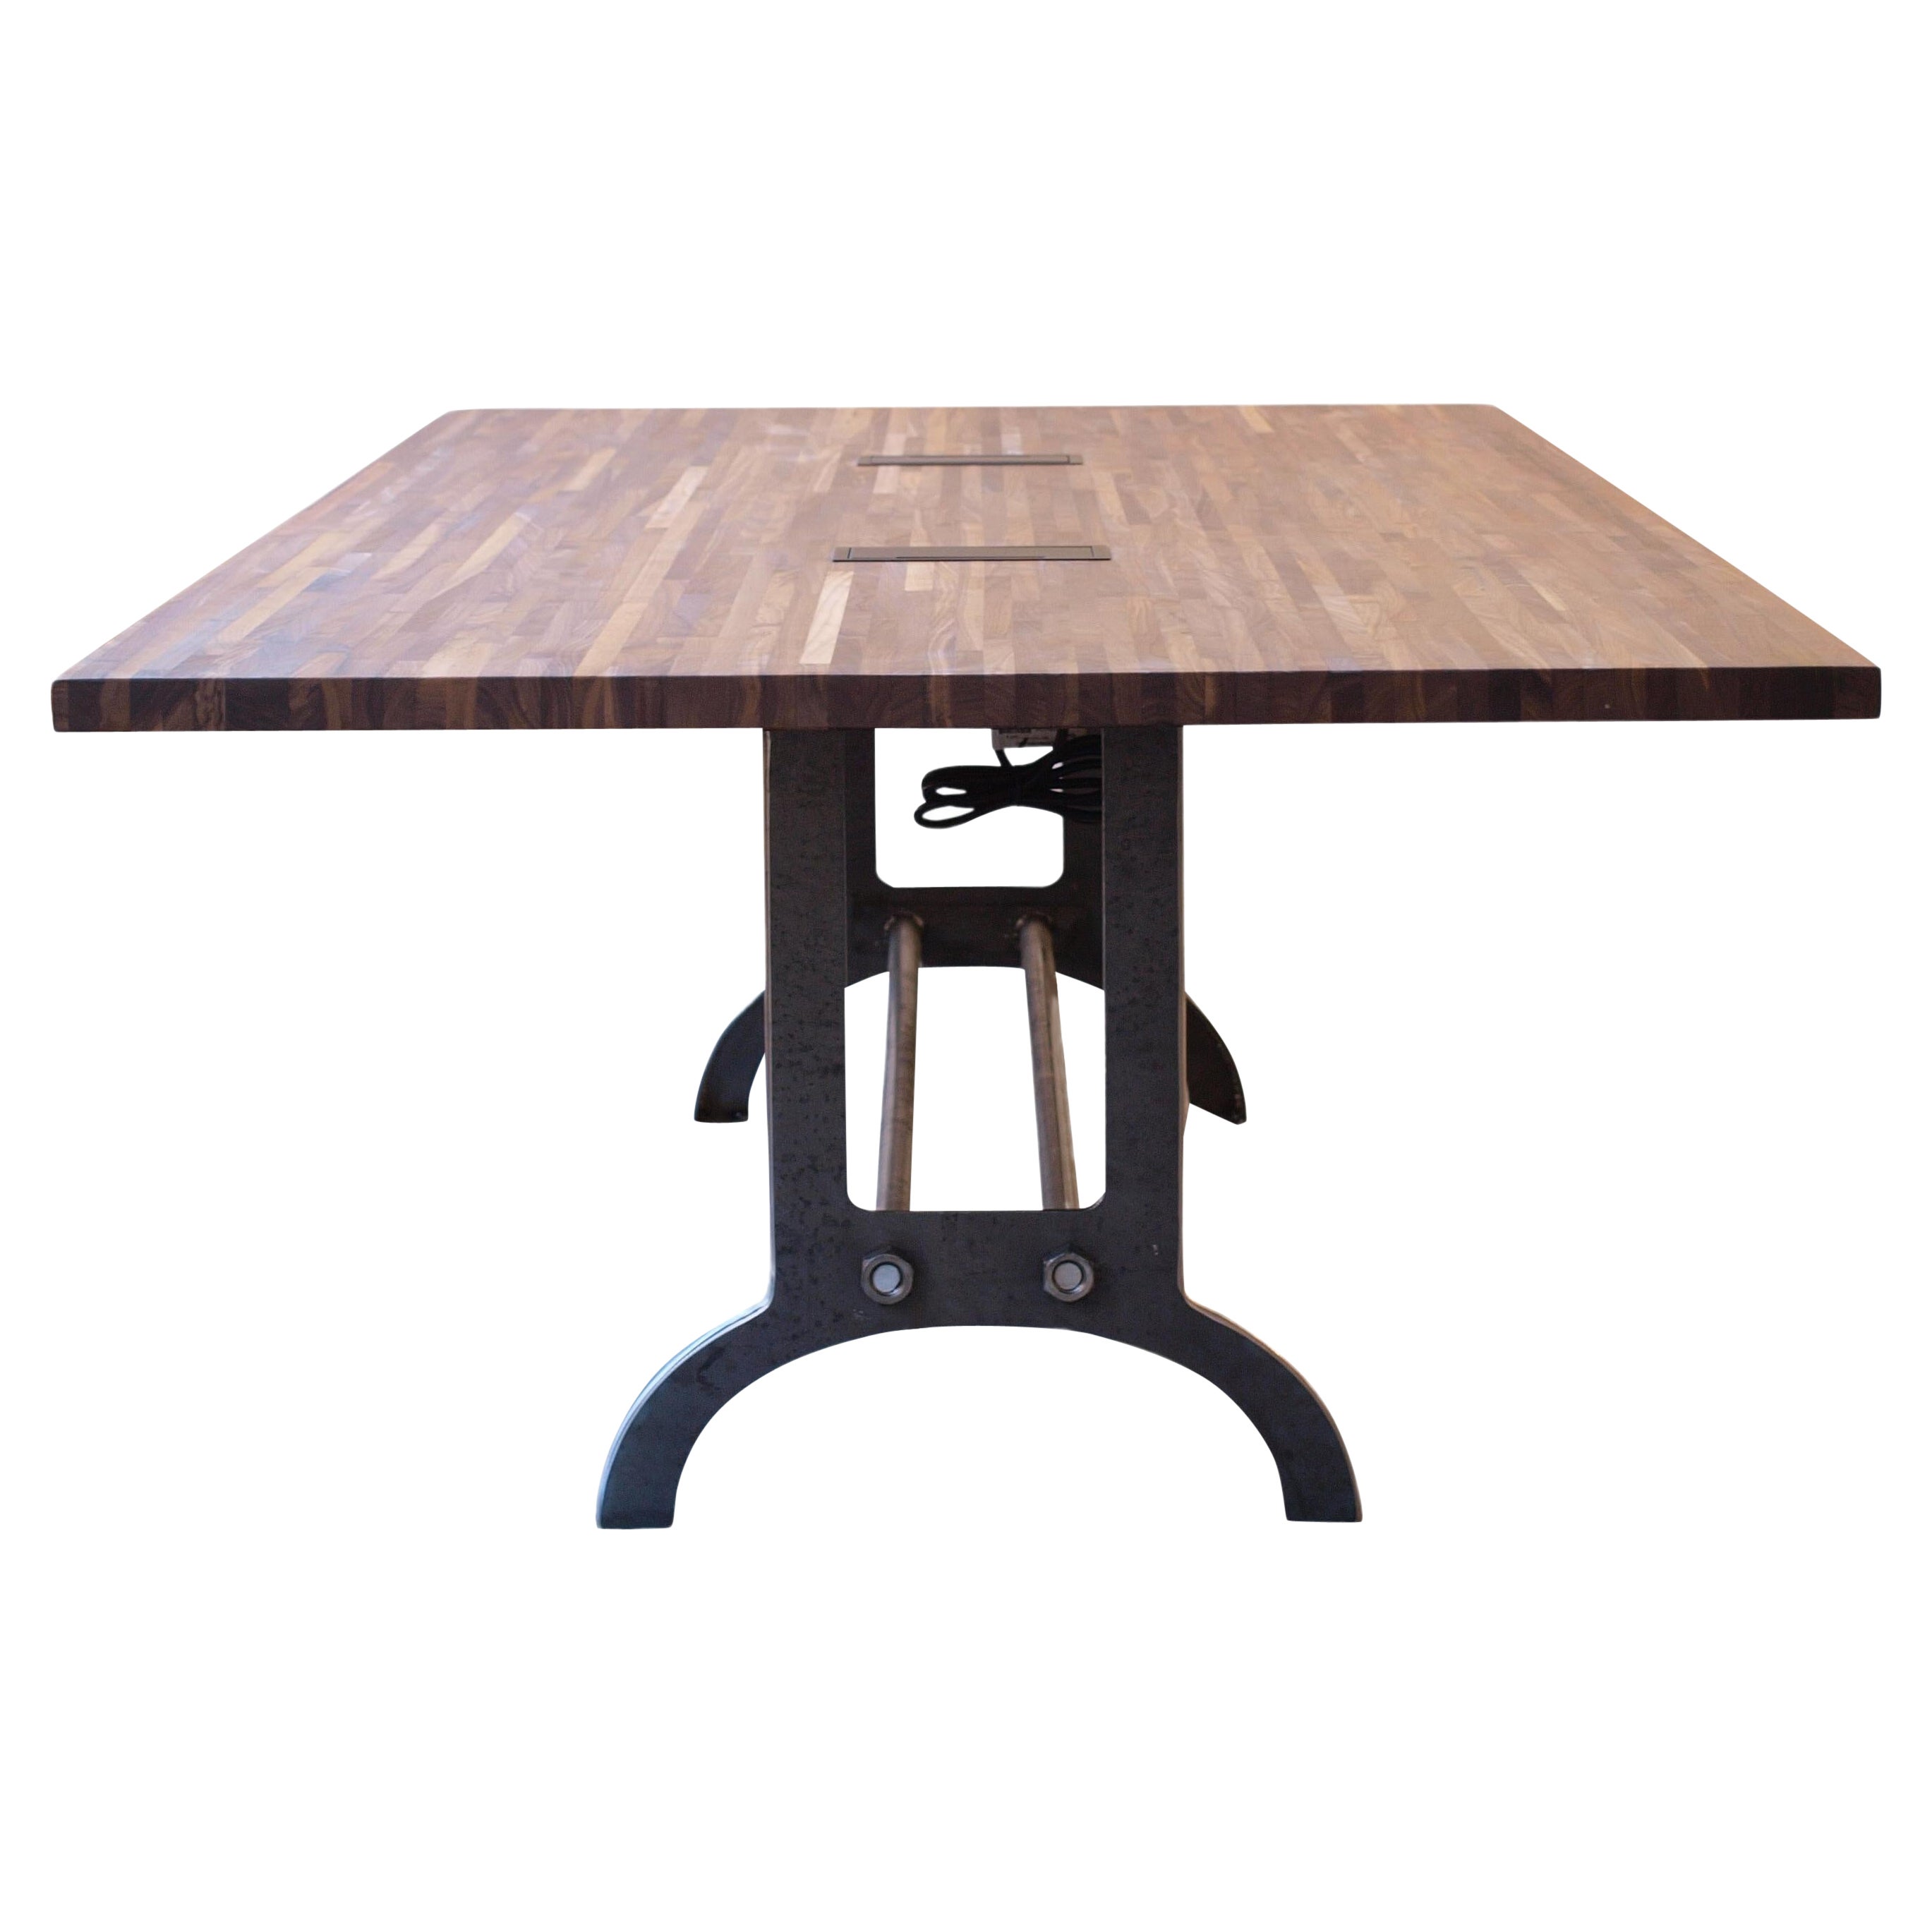 10 foot Industrial Beech Wood conference table